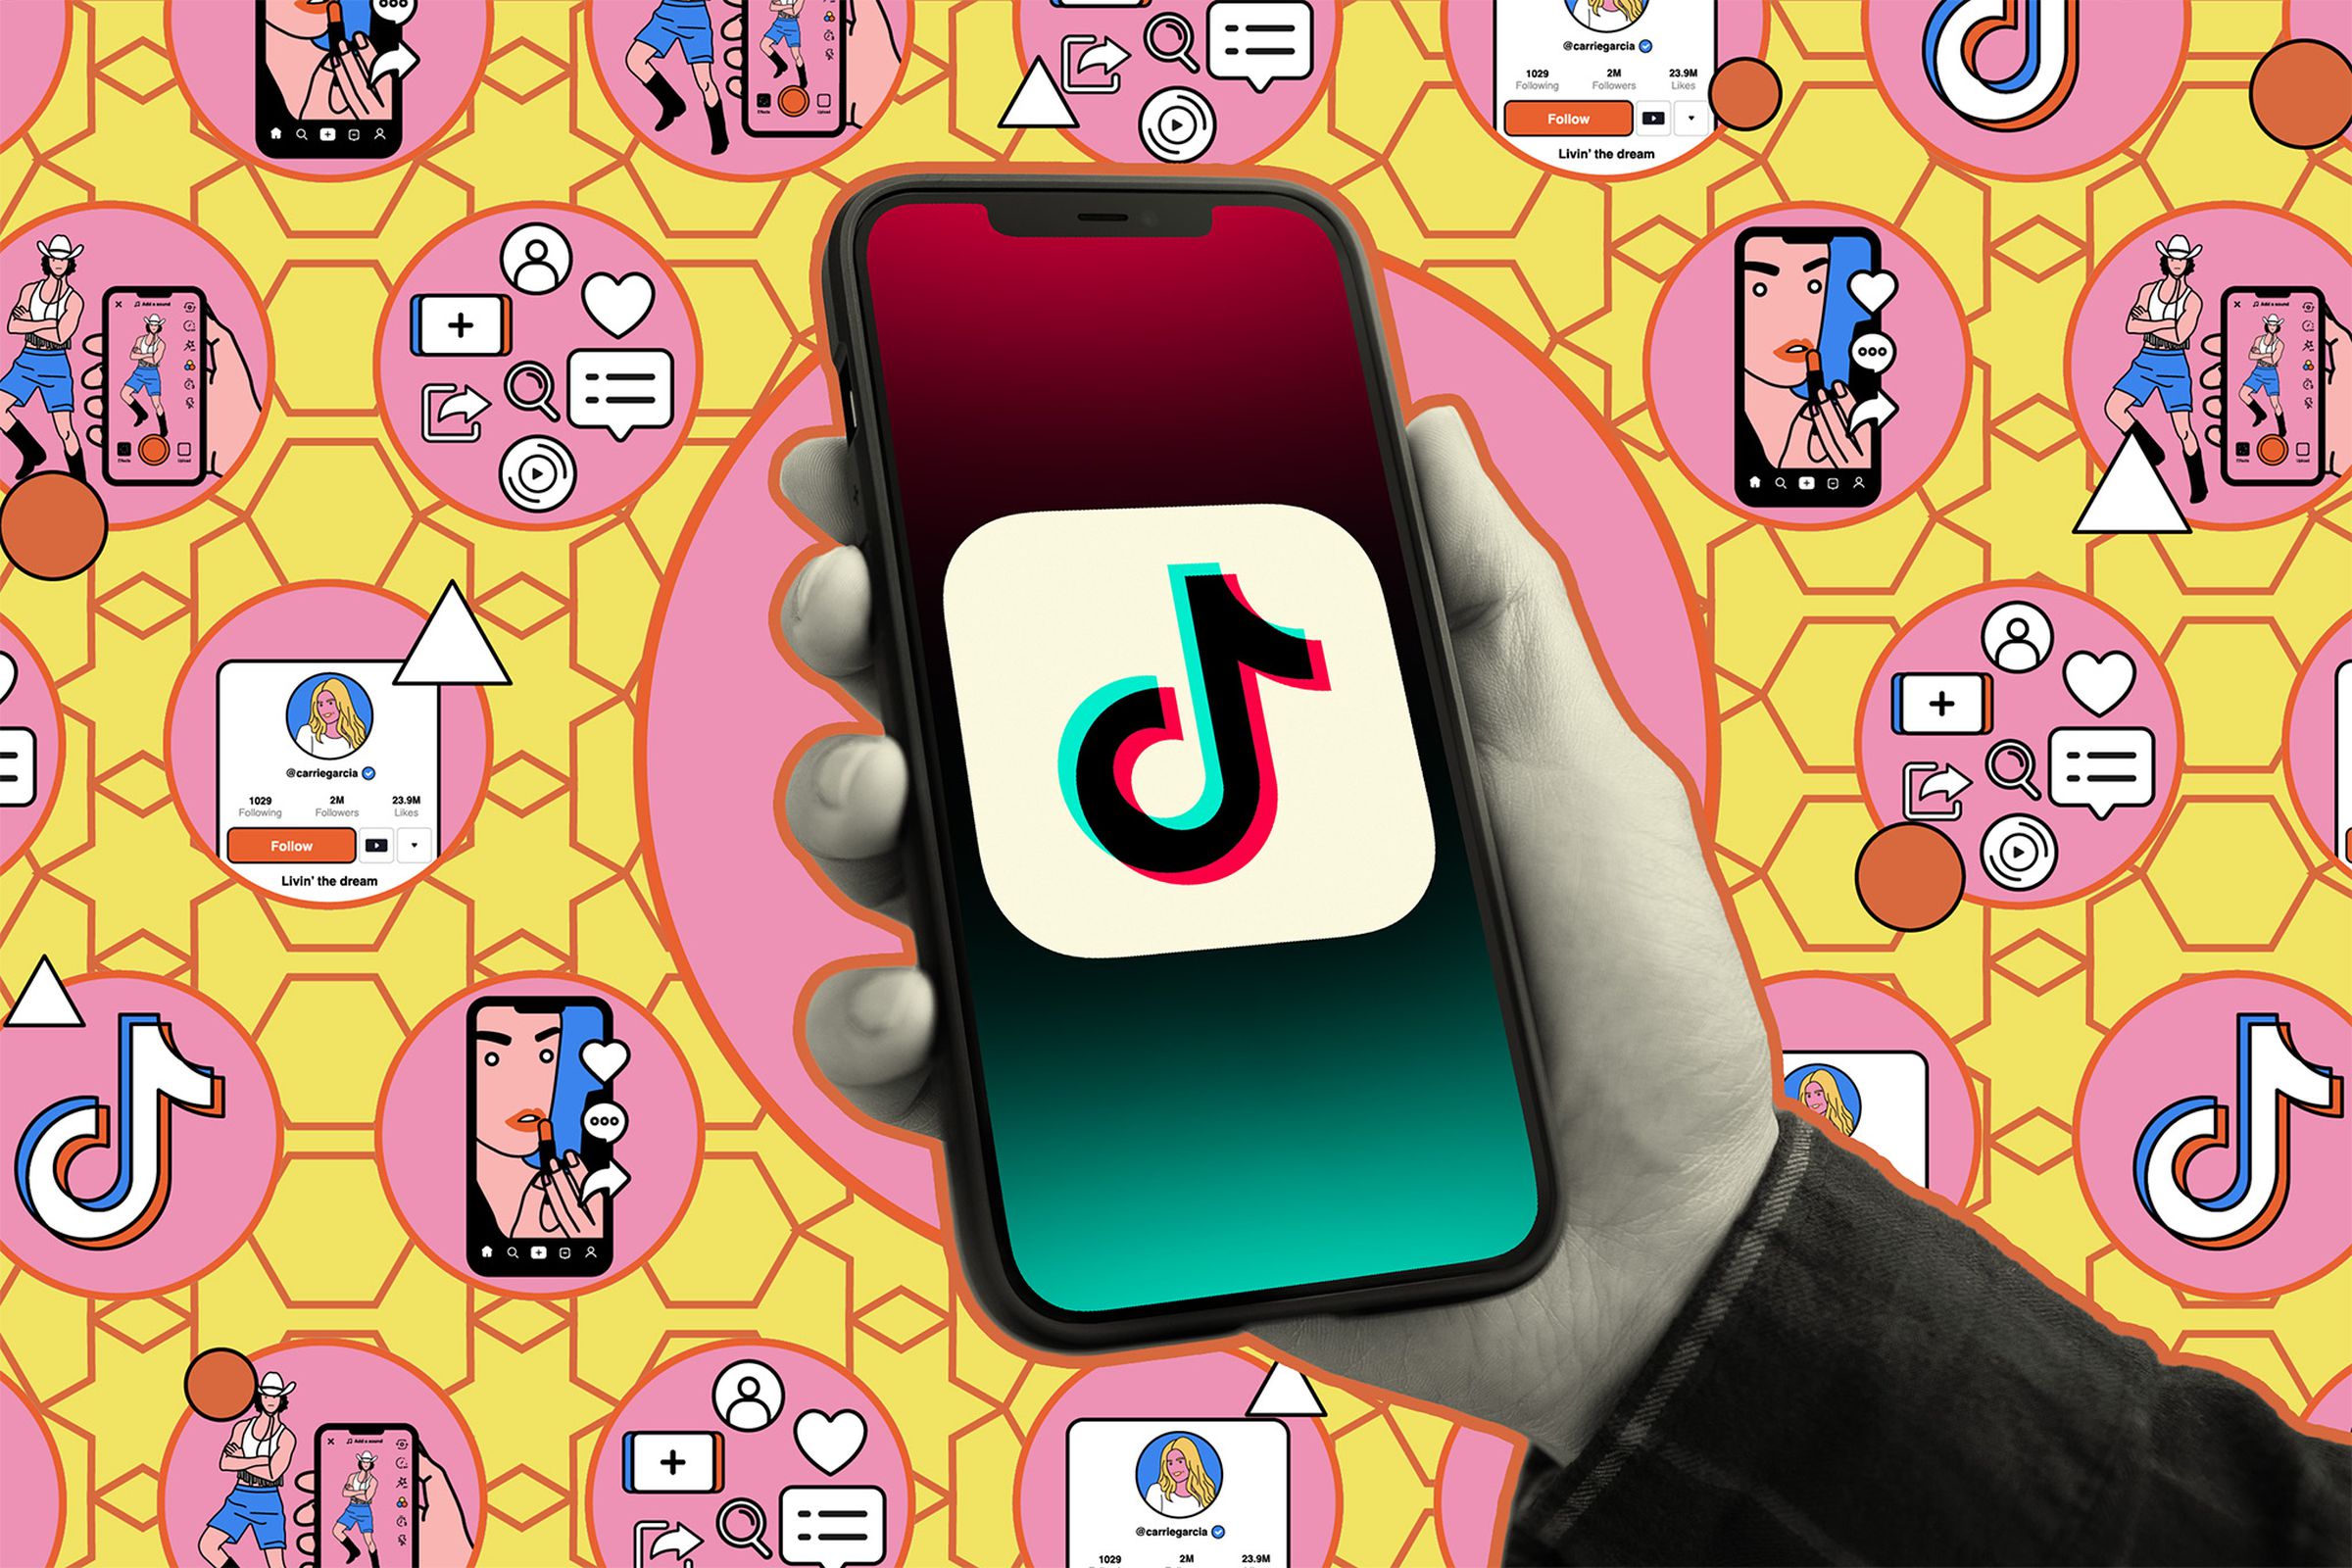 Hand holding a phone with a TikTok logo against an illustrated background